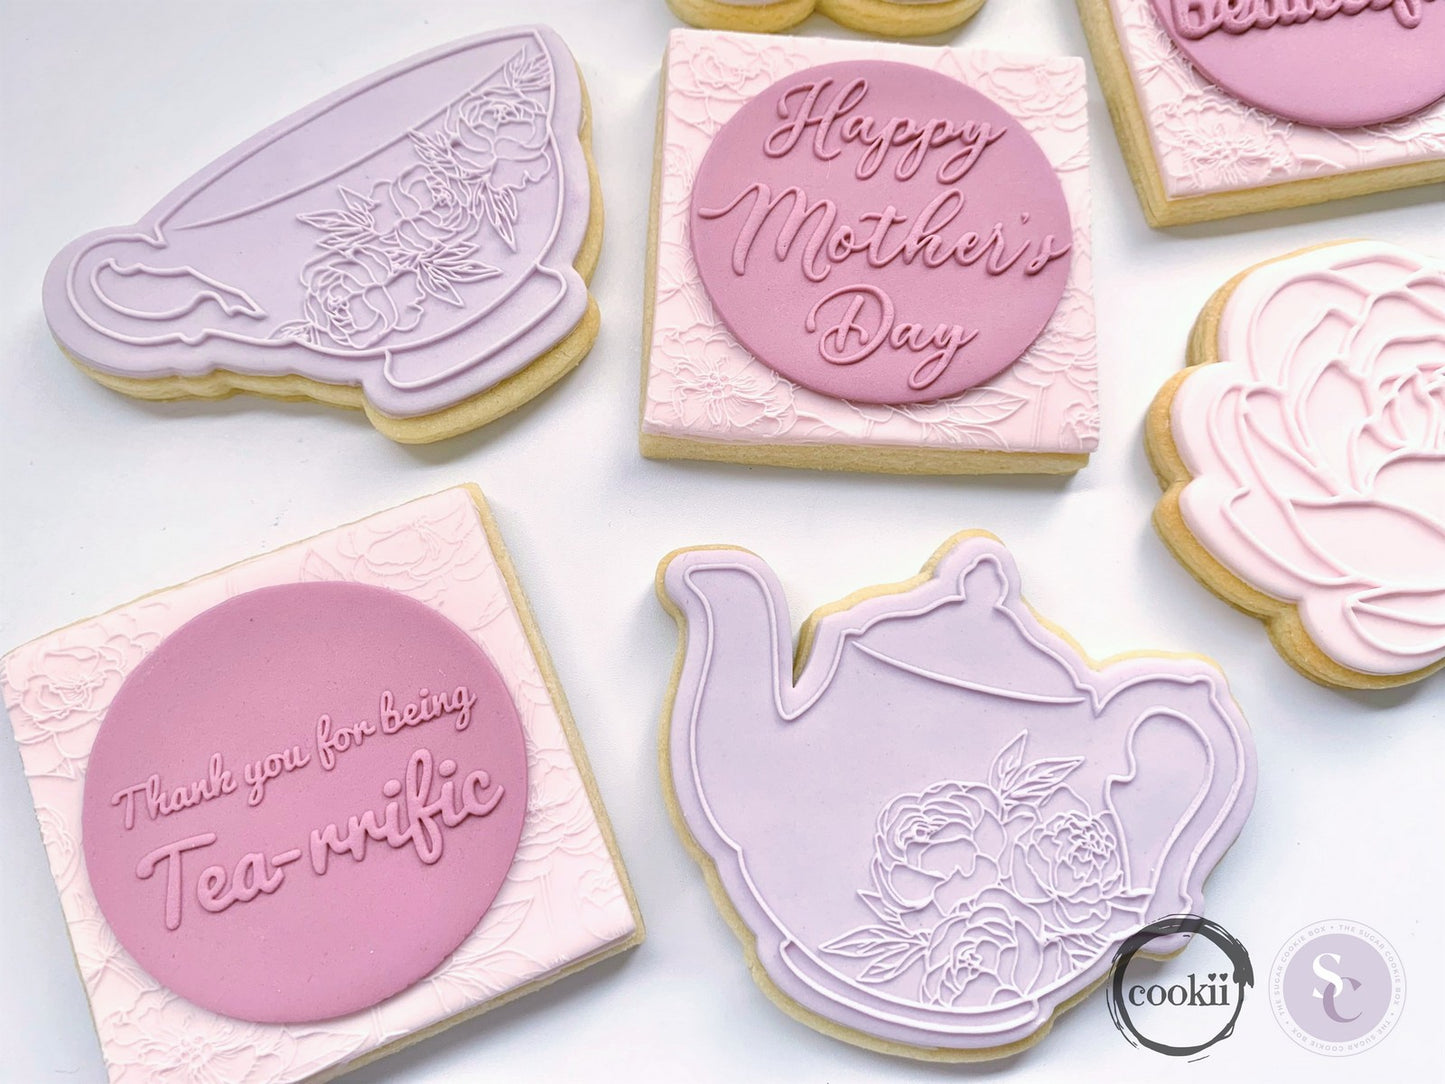 "Happy Mother's Day" Style 1 - Raised Embosser